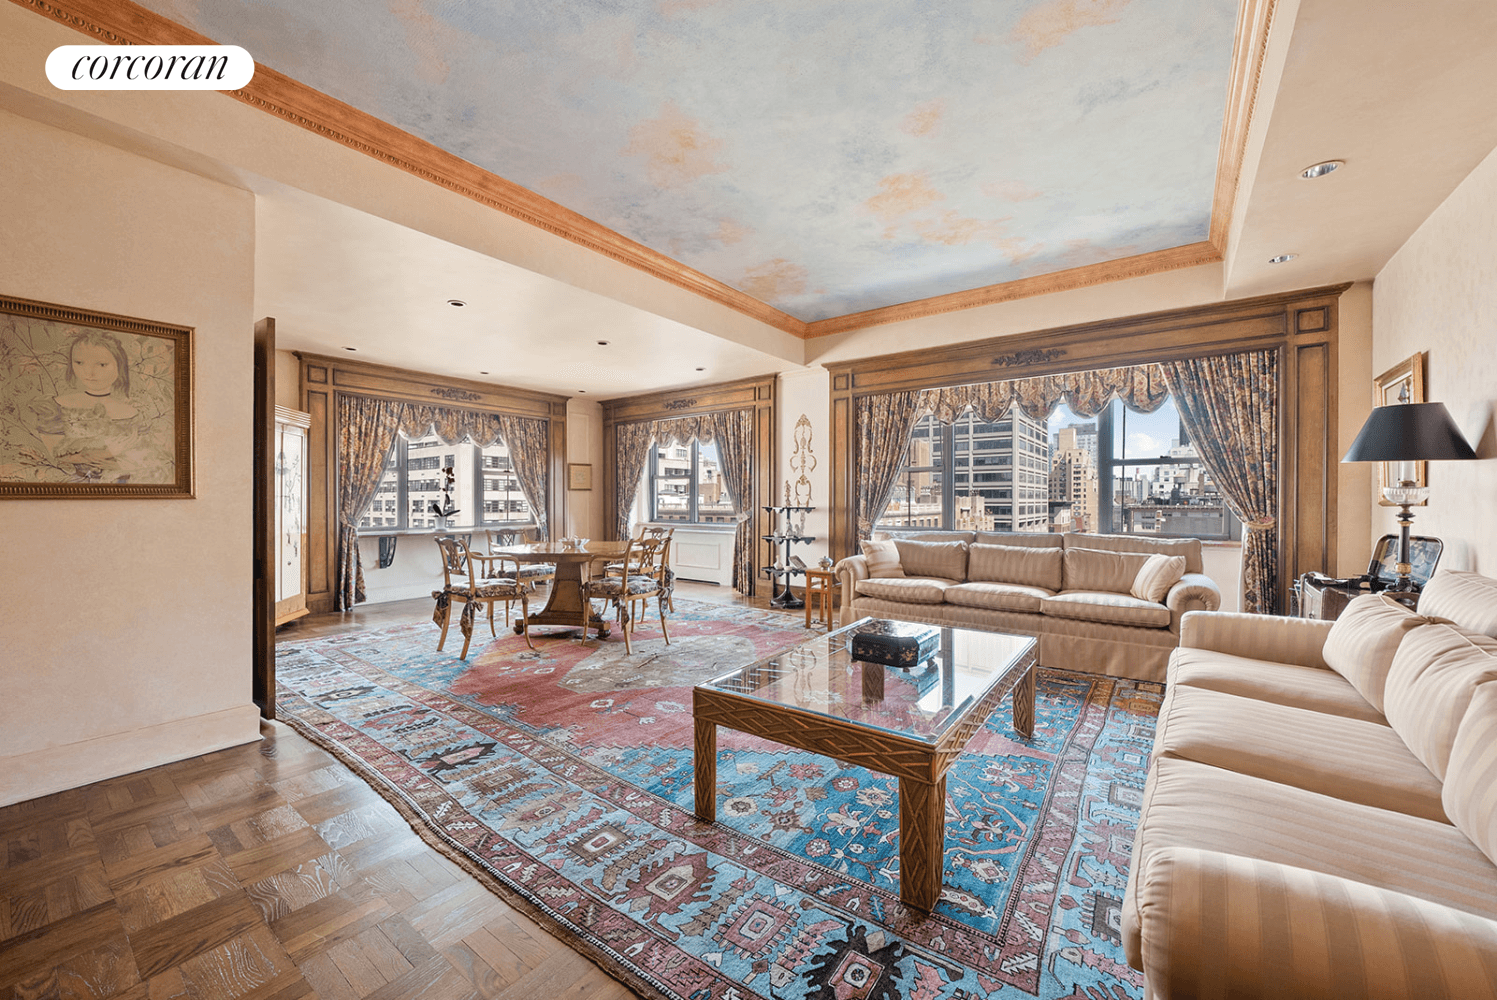 This 16th floor corner home is perched high above Park Avenue.